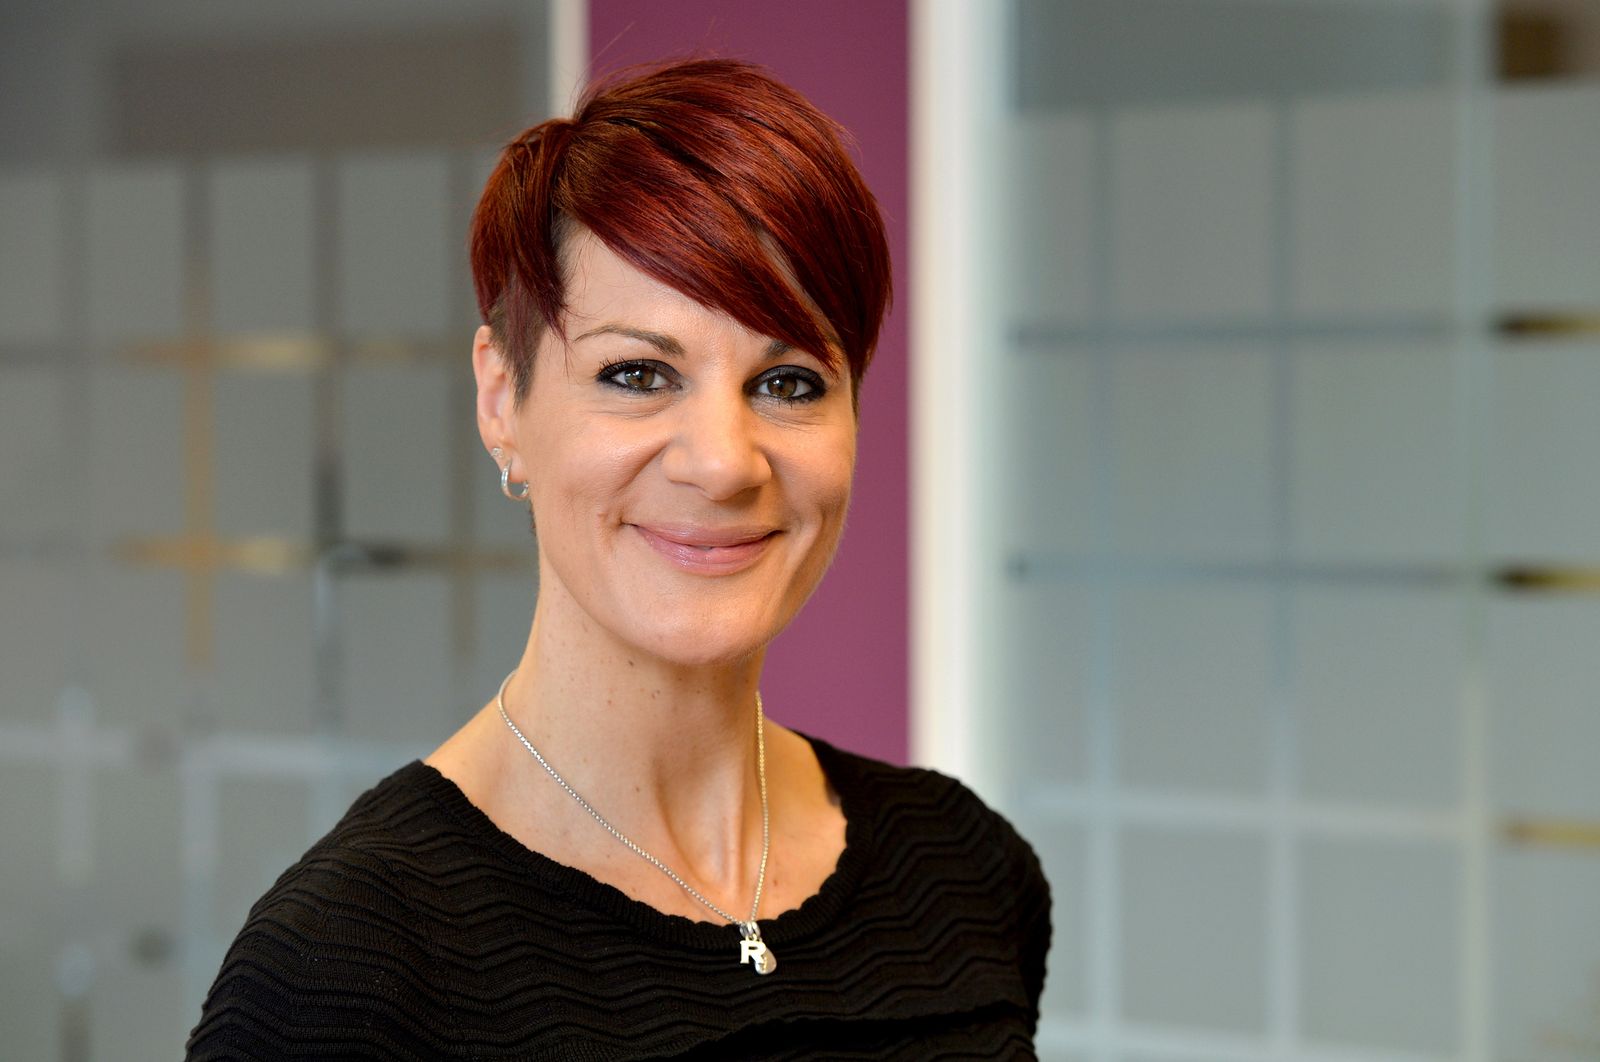 Family law specialist named in industry awards guide